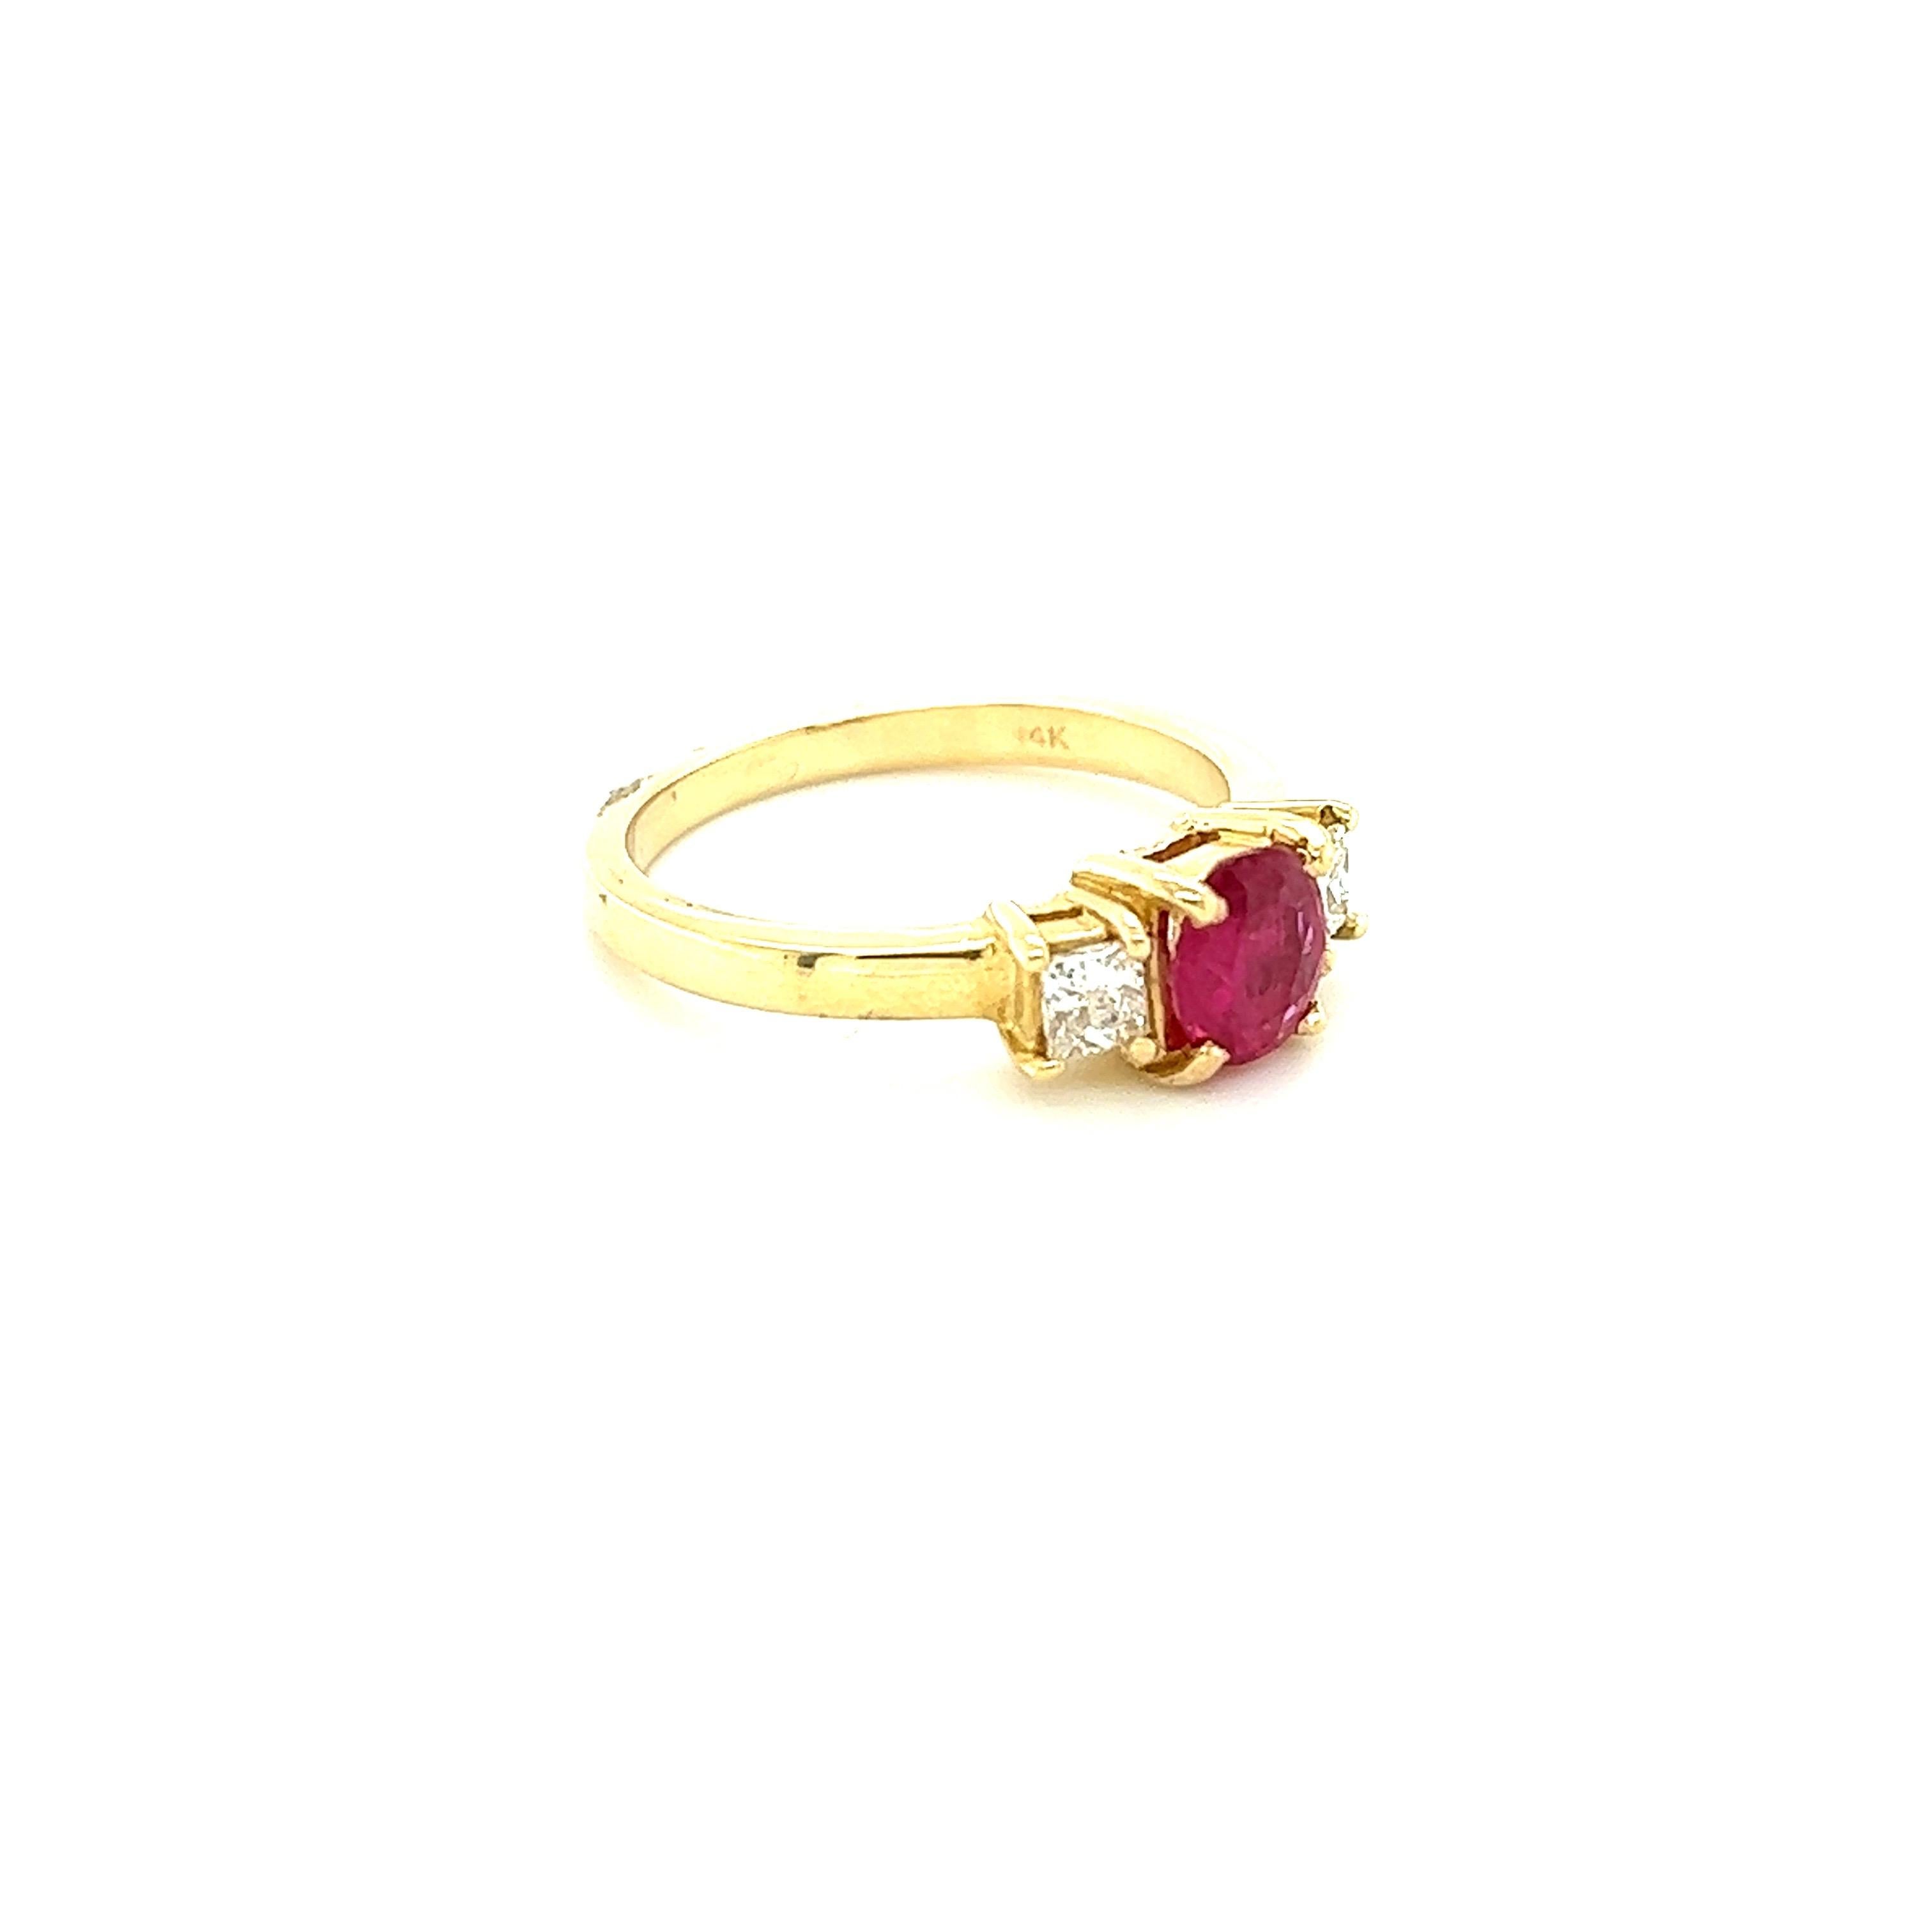 This Ring has a Oval Cut Natural Ruby that measures 6 mm x 5 mm and weighs 0.67 carats and it has 2 Princess Cut Diamonds that weigh 0.27 carats. The total carat weight of the ring is 0.94 carats. 

The ring is casted in 14K Yellow Gold and weighs